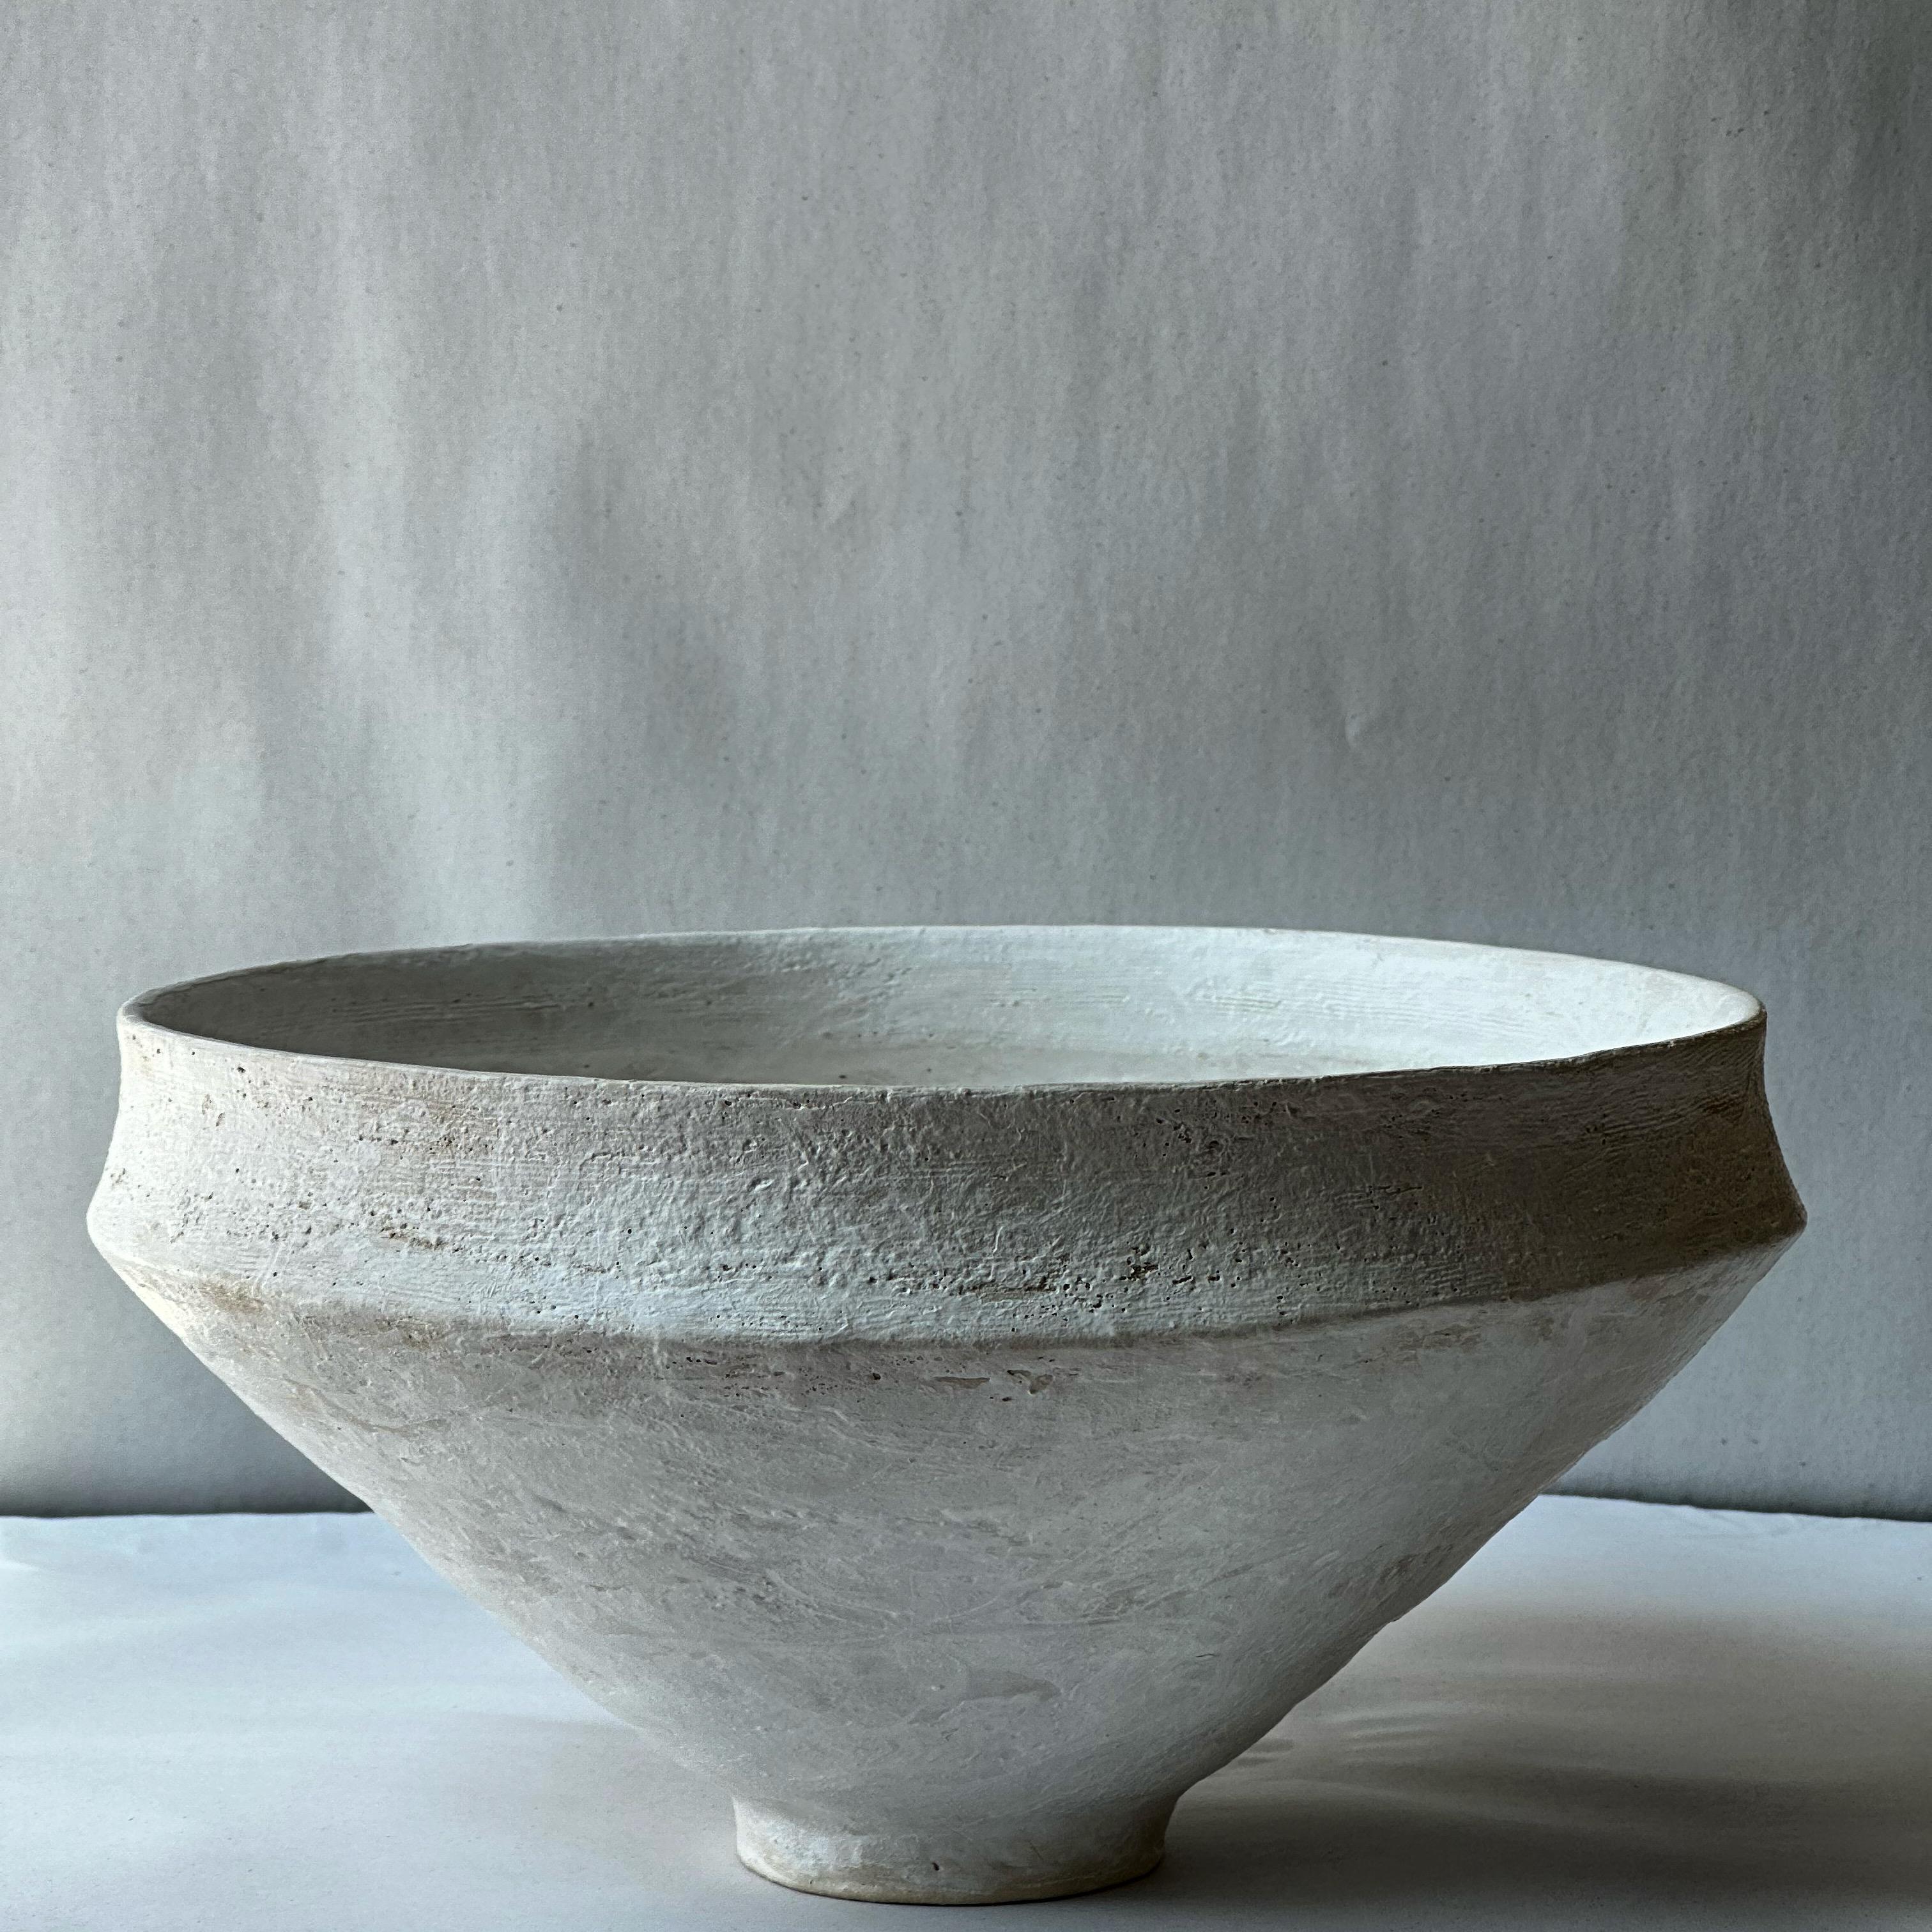 Grey Stoneware Roman Bowl by Elena Vasilantonaki
Unique
Dimensions: ⌀ 28 x H 14 cm (Dimensions may vary)
Materials: Stoneware
Available finishes: Black, White, Brown, Red White Patina

Growing up in Greece I was surrounded by pottery forms that have